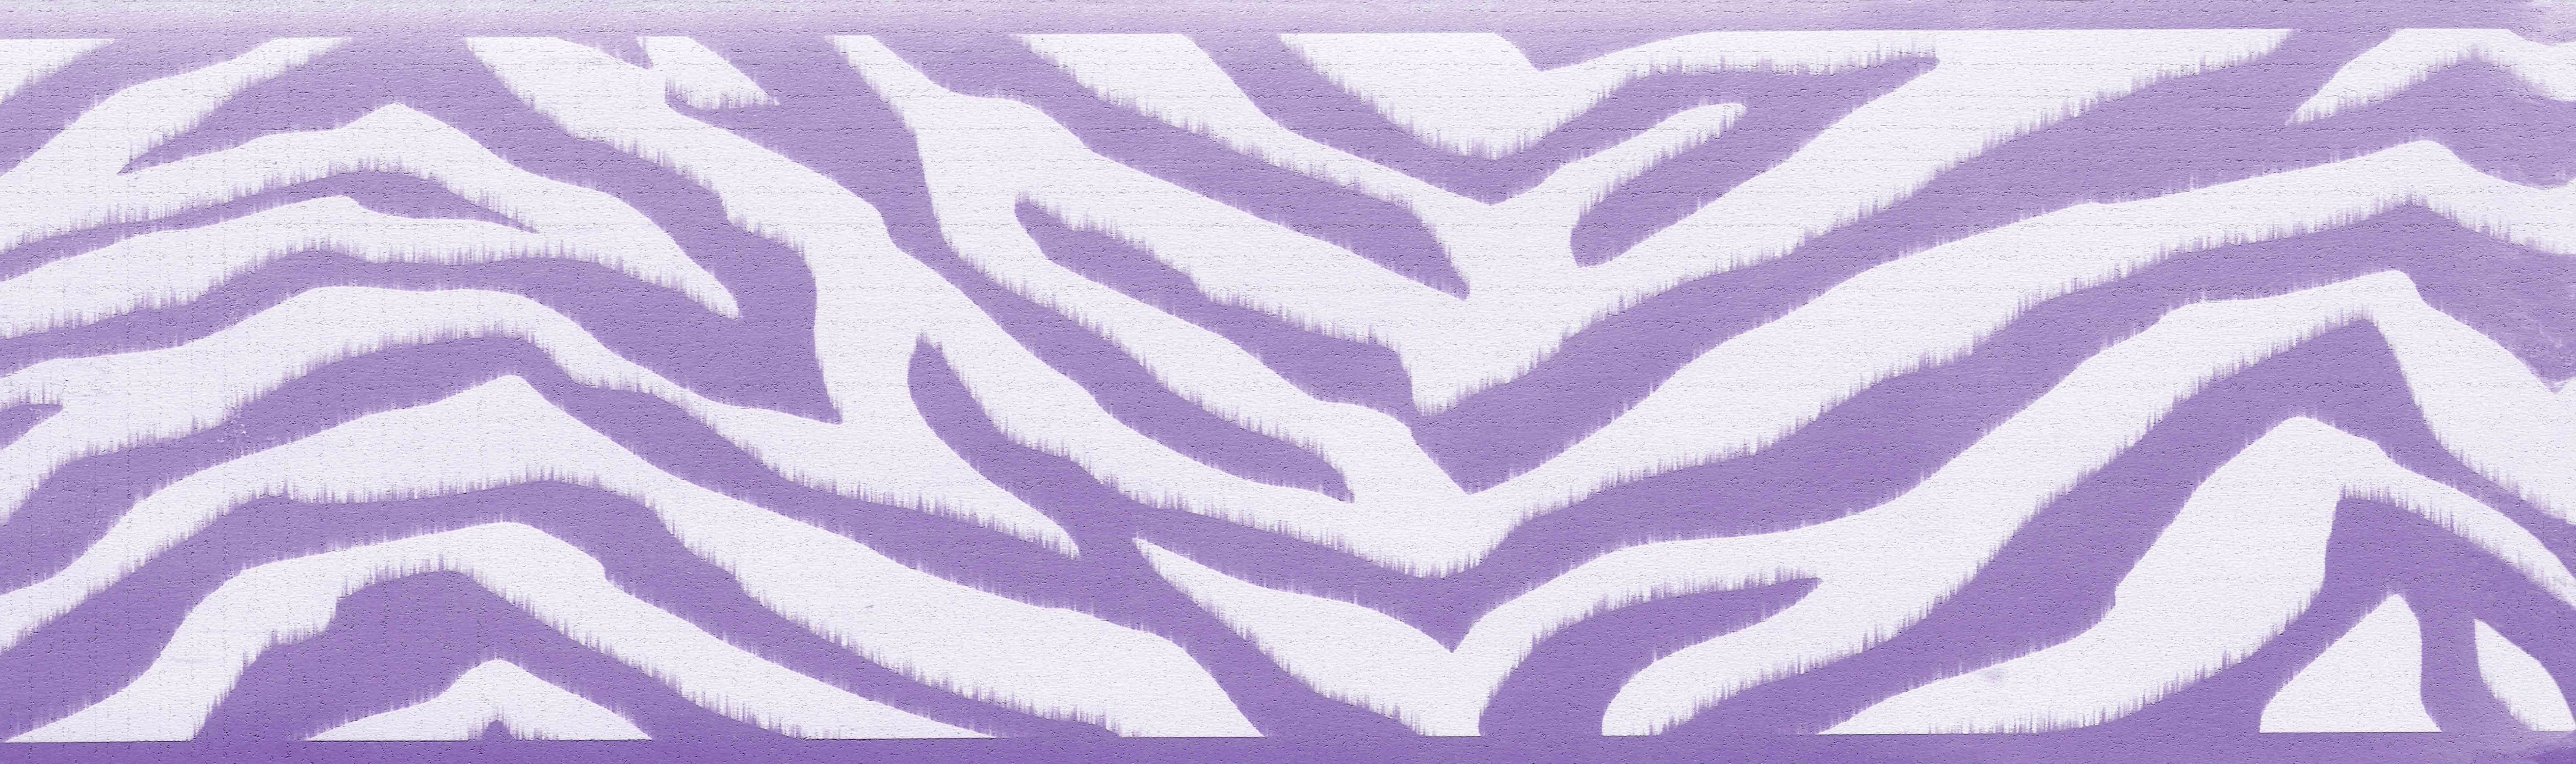 Dundee Deco's Peel and Stick Wallpaper Border - Abstract Purple White Zebra  Print Wall Border Retro Design, 15 ft x 7 in, Self Adhesive 